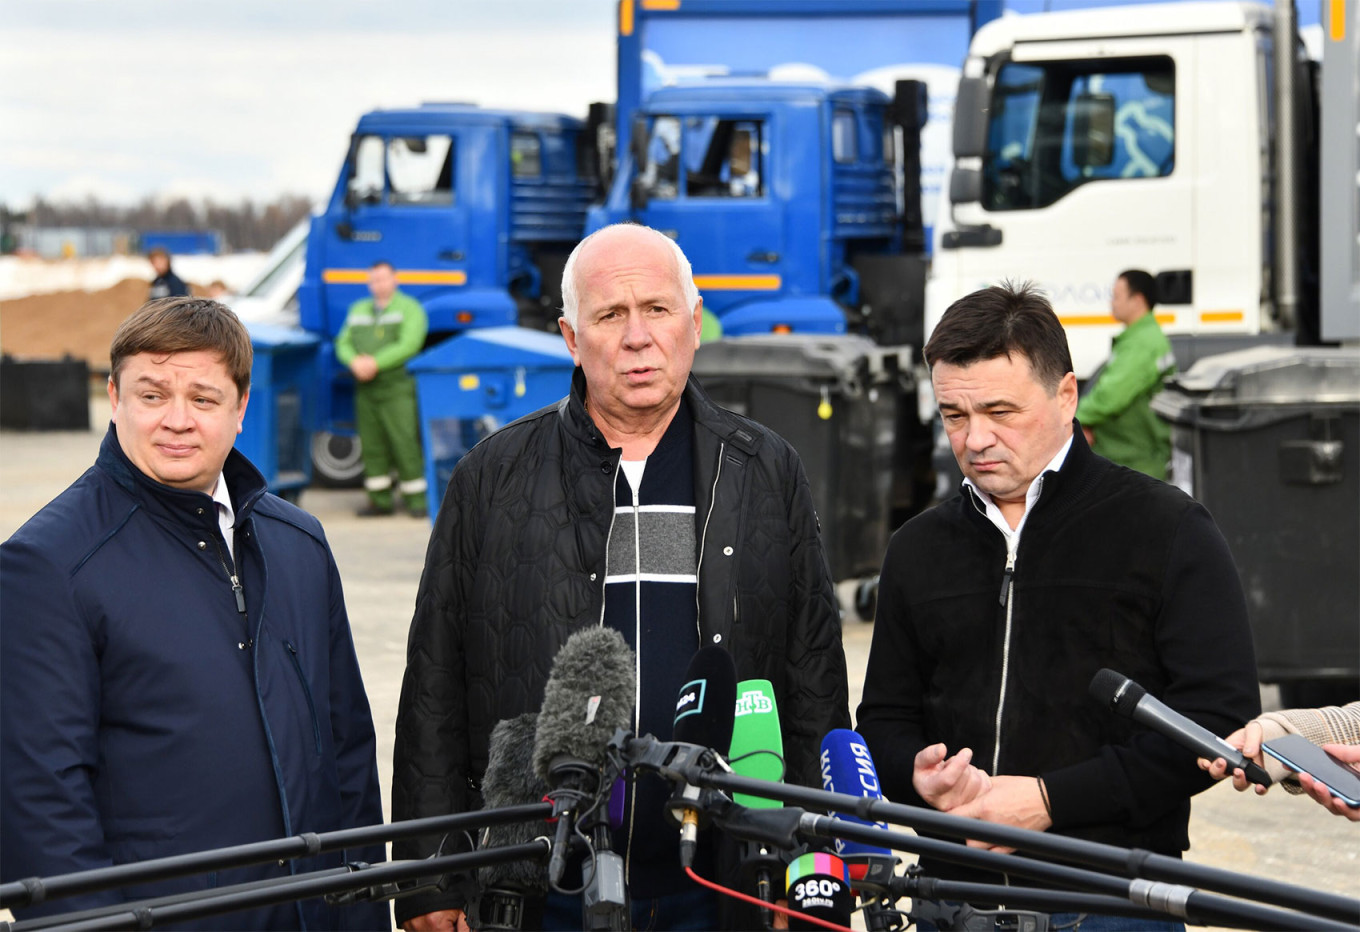 
					From left: RT-Invest CEO Andrei Shipelov, Rostec State Corporation CEO Sergei Chemezov and Moscow region Governor Andrei Vorobyev open a waste processing plant in Myachkovo in 2019.					 					Igor Ivanko / Moskva News Agency				